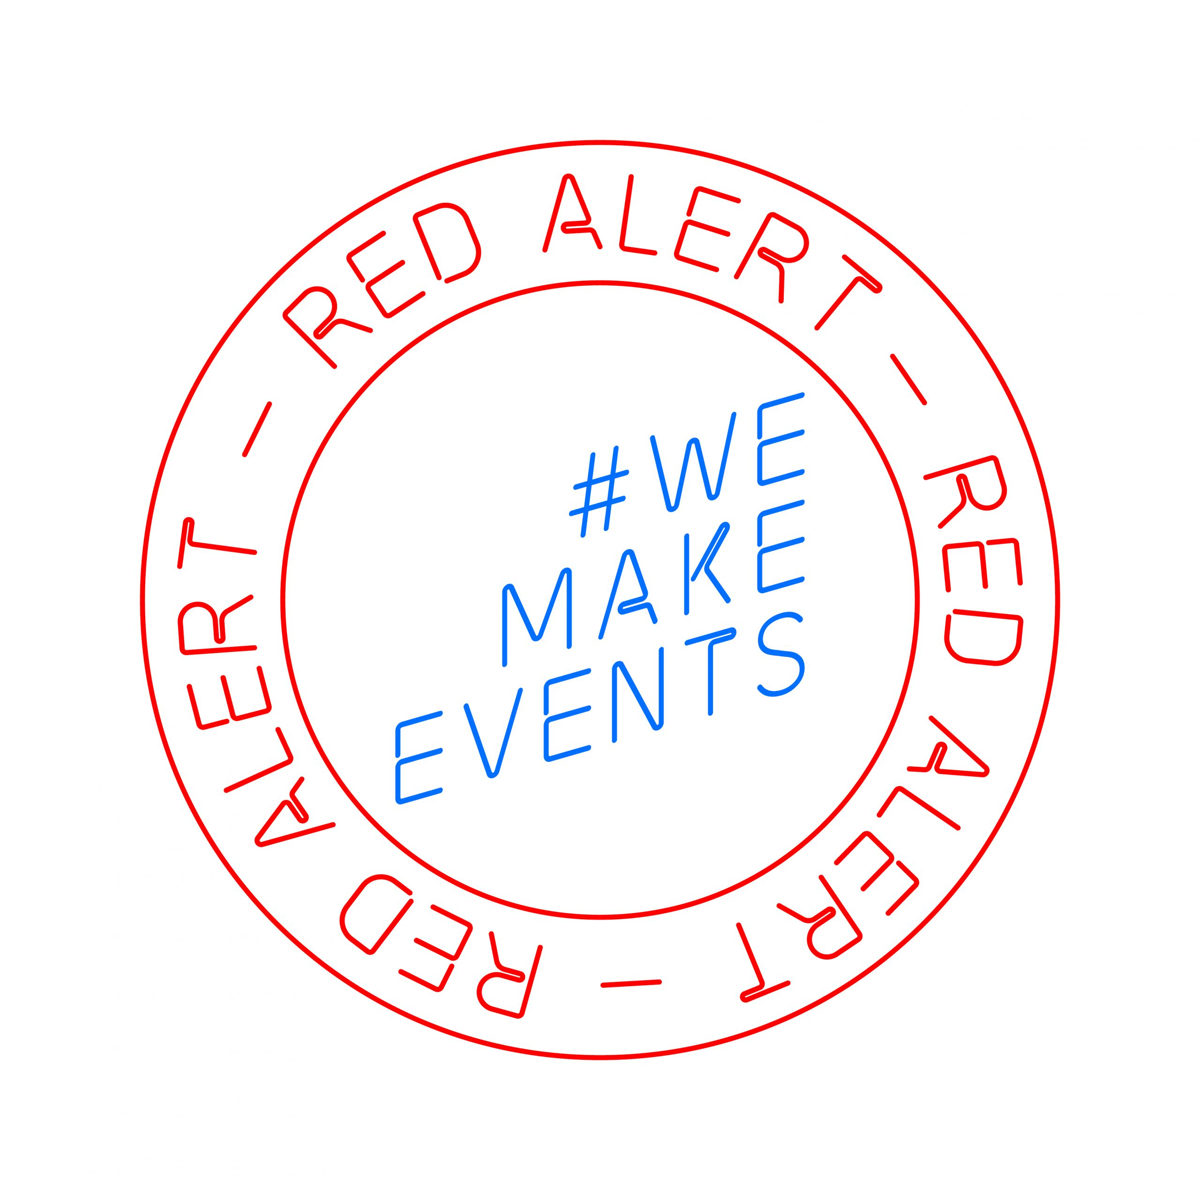 The RedAlert #WeMakeEvents logo has been shared thousands of times on social media.